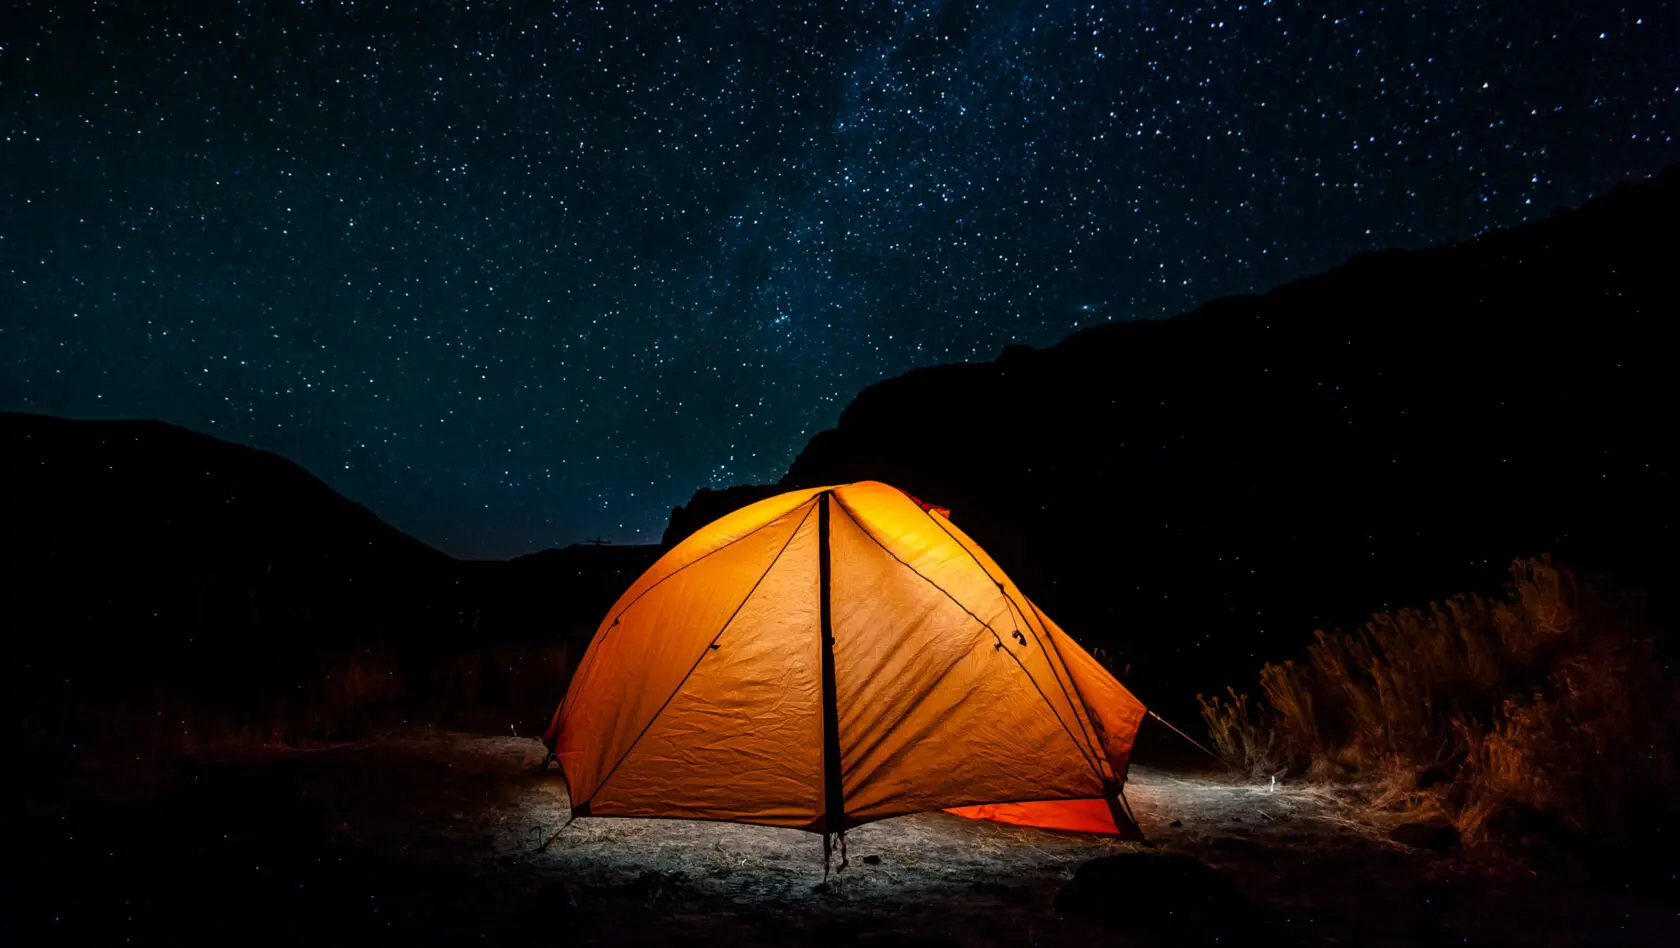 Tent under a stary sky